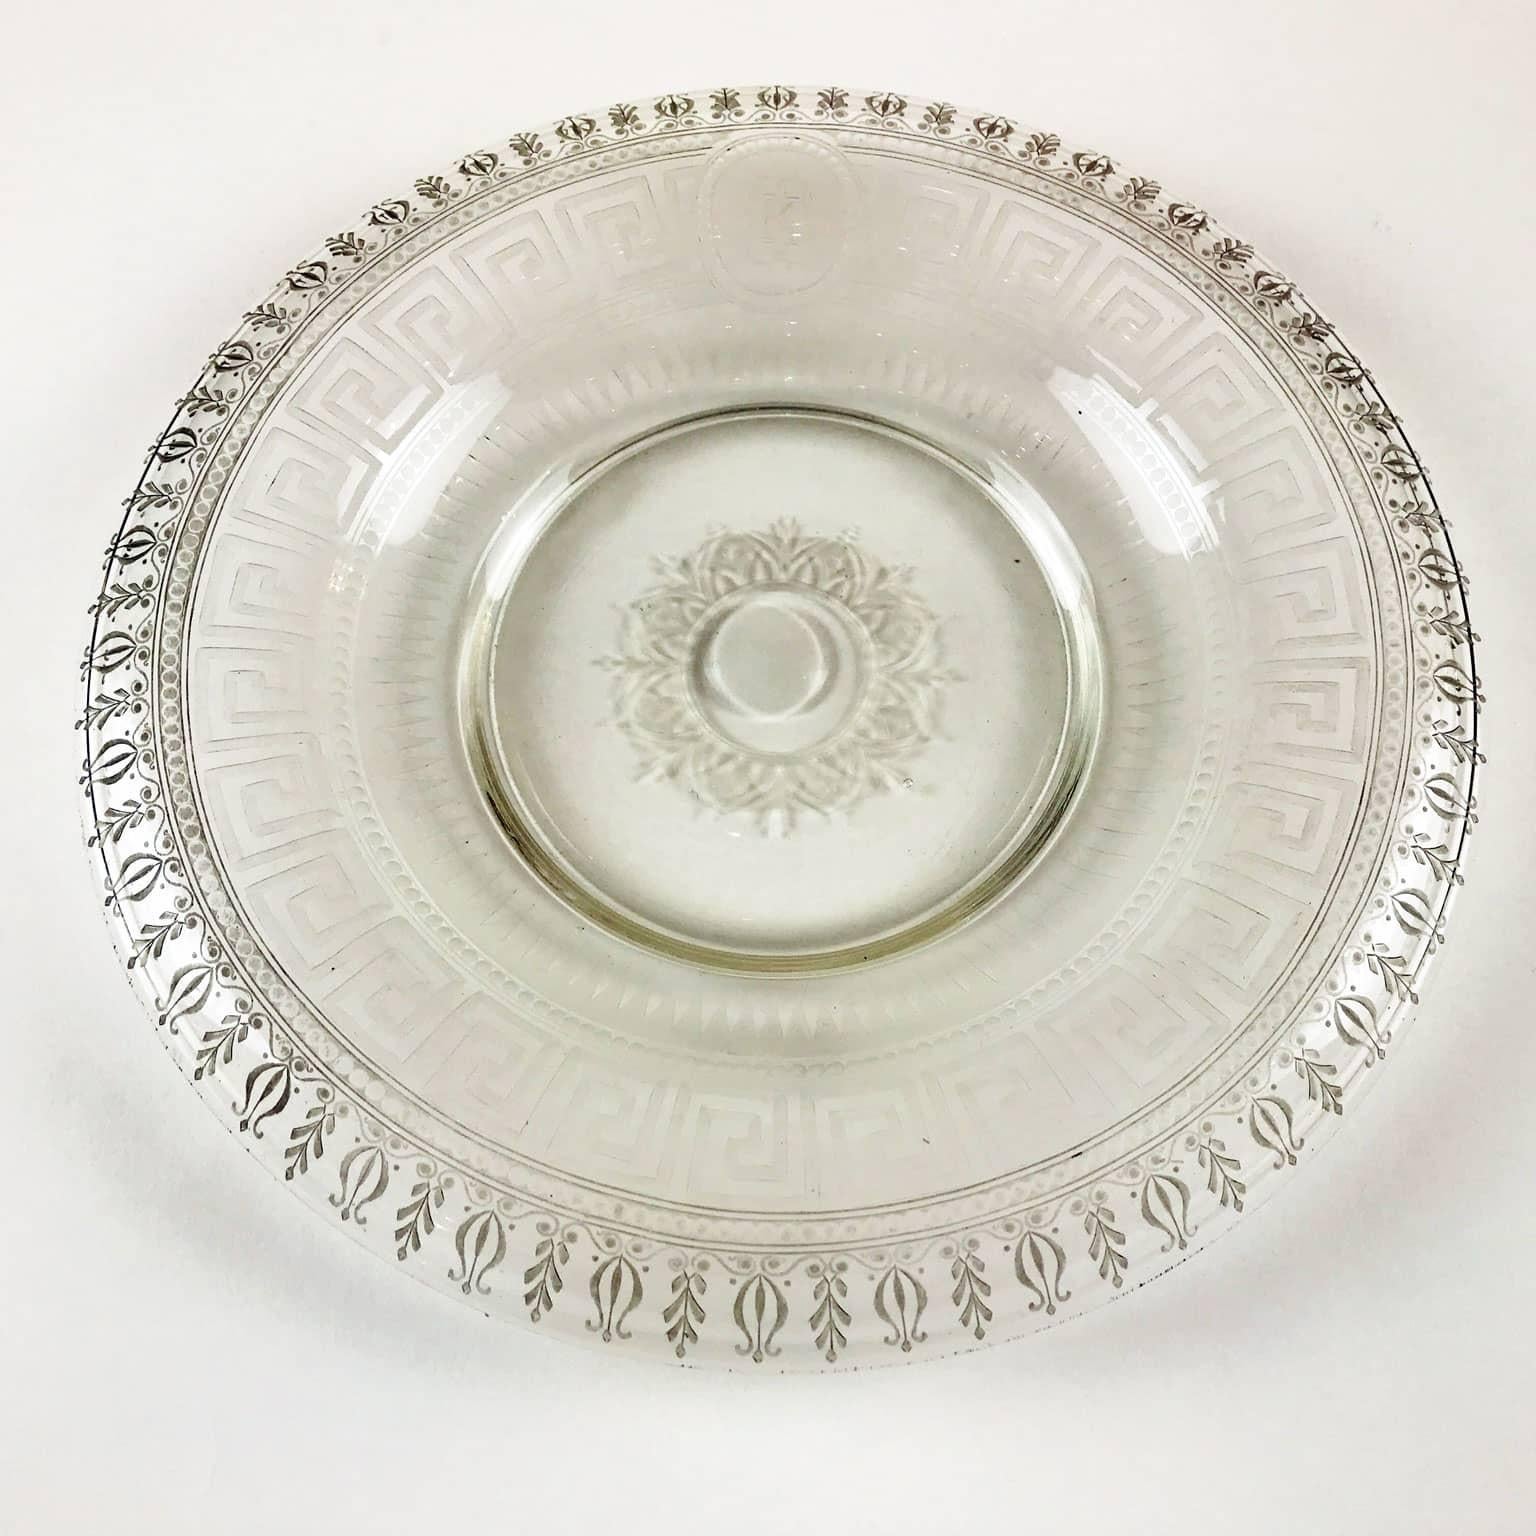 19th Century Bohemian circular etched glass dish with Neoclassical ornaments, a very fine geometrical and floral engraved decoration and the etched K initial letter. Beautiful etching - an incredible work of art and very high quality glass